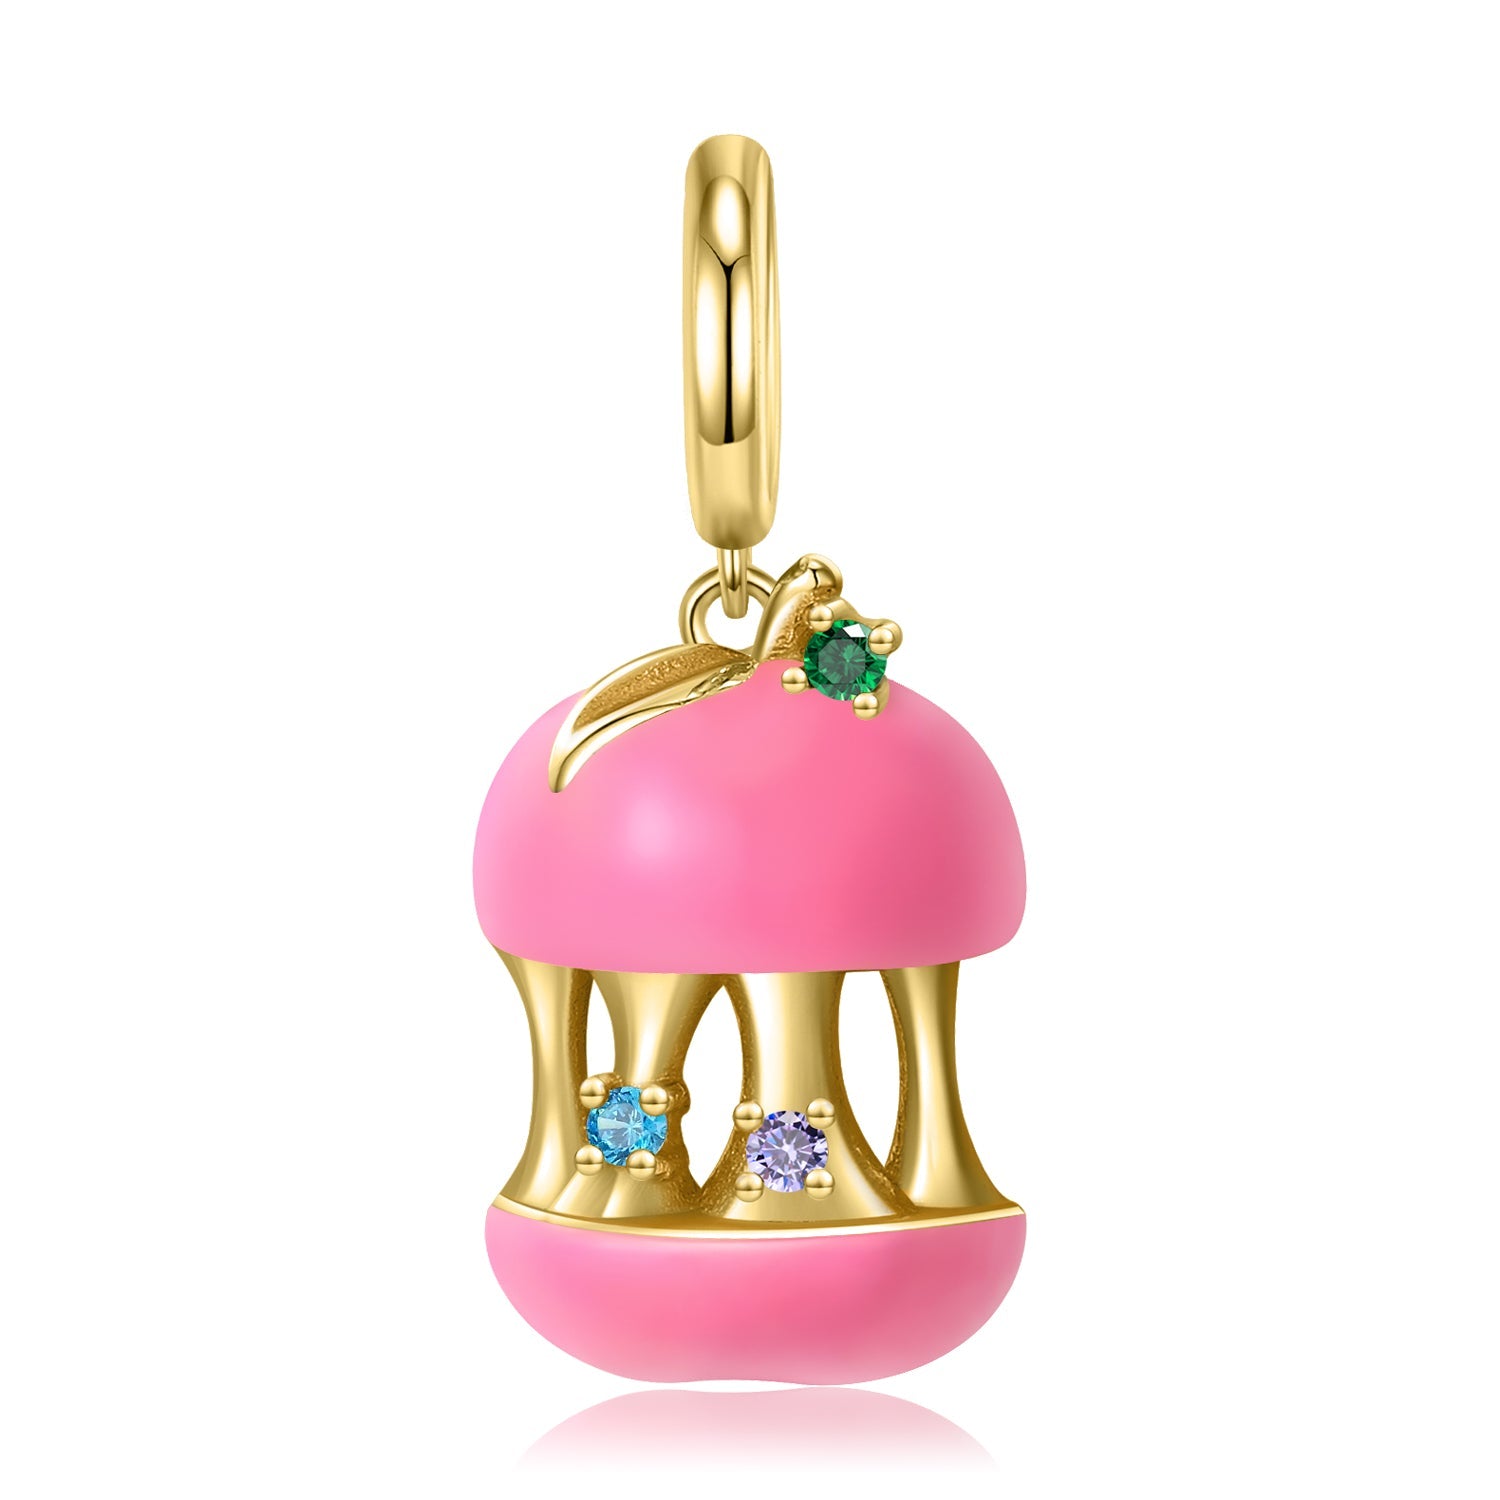 Pink golden cage with stones